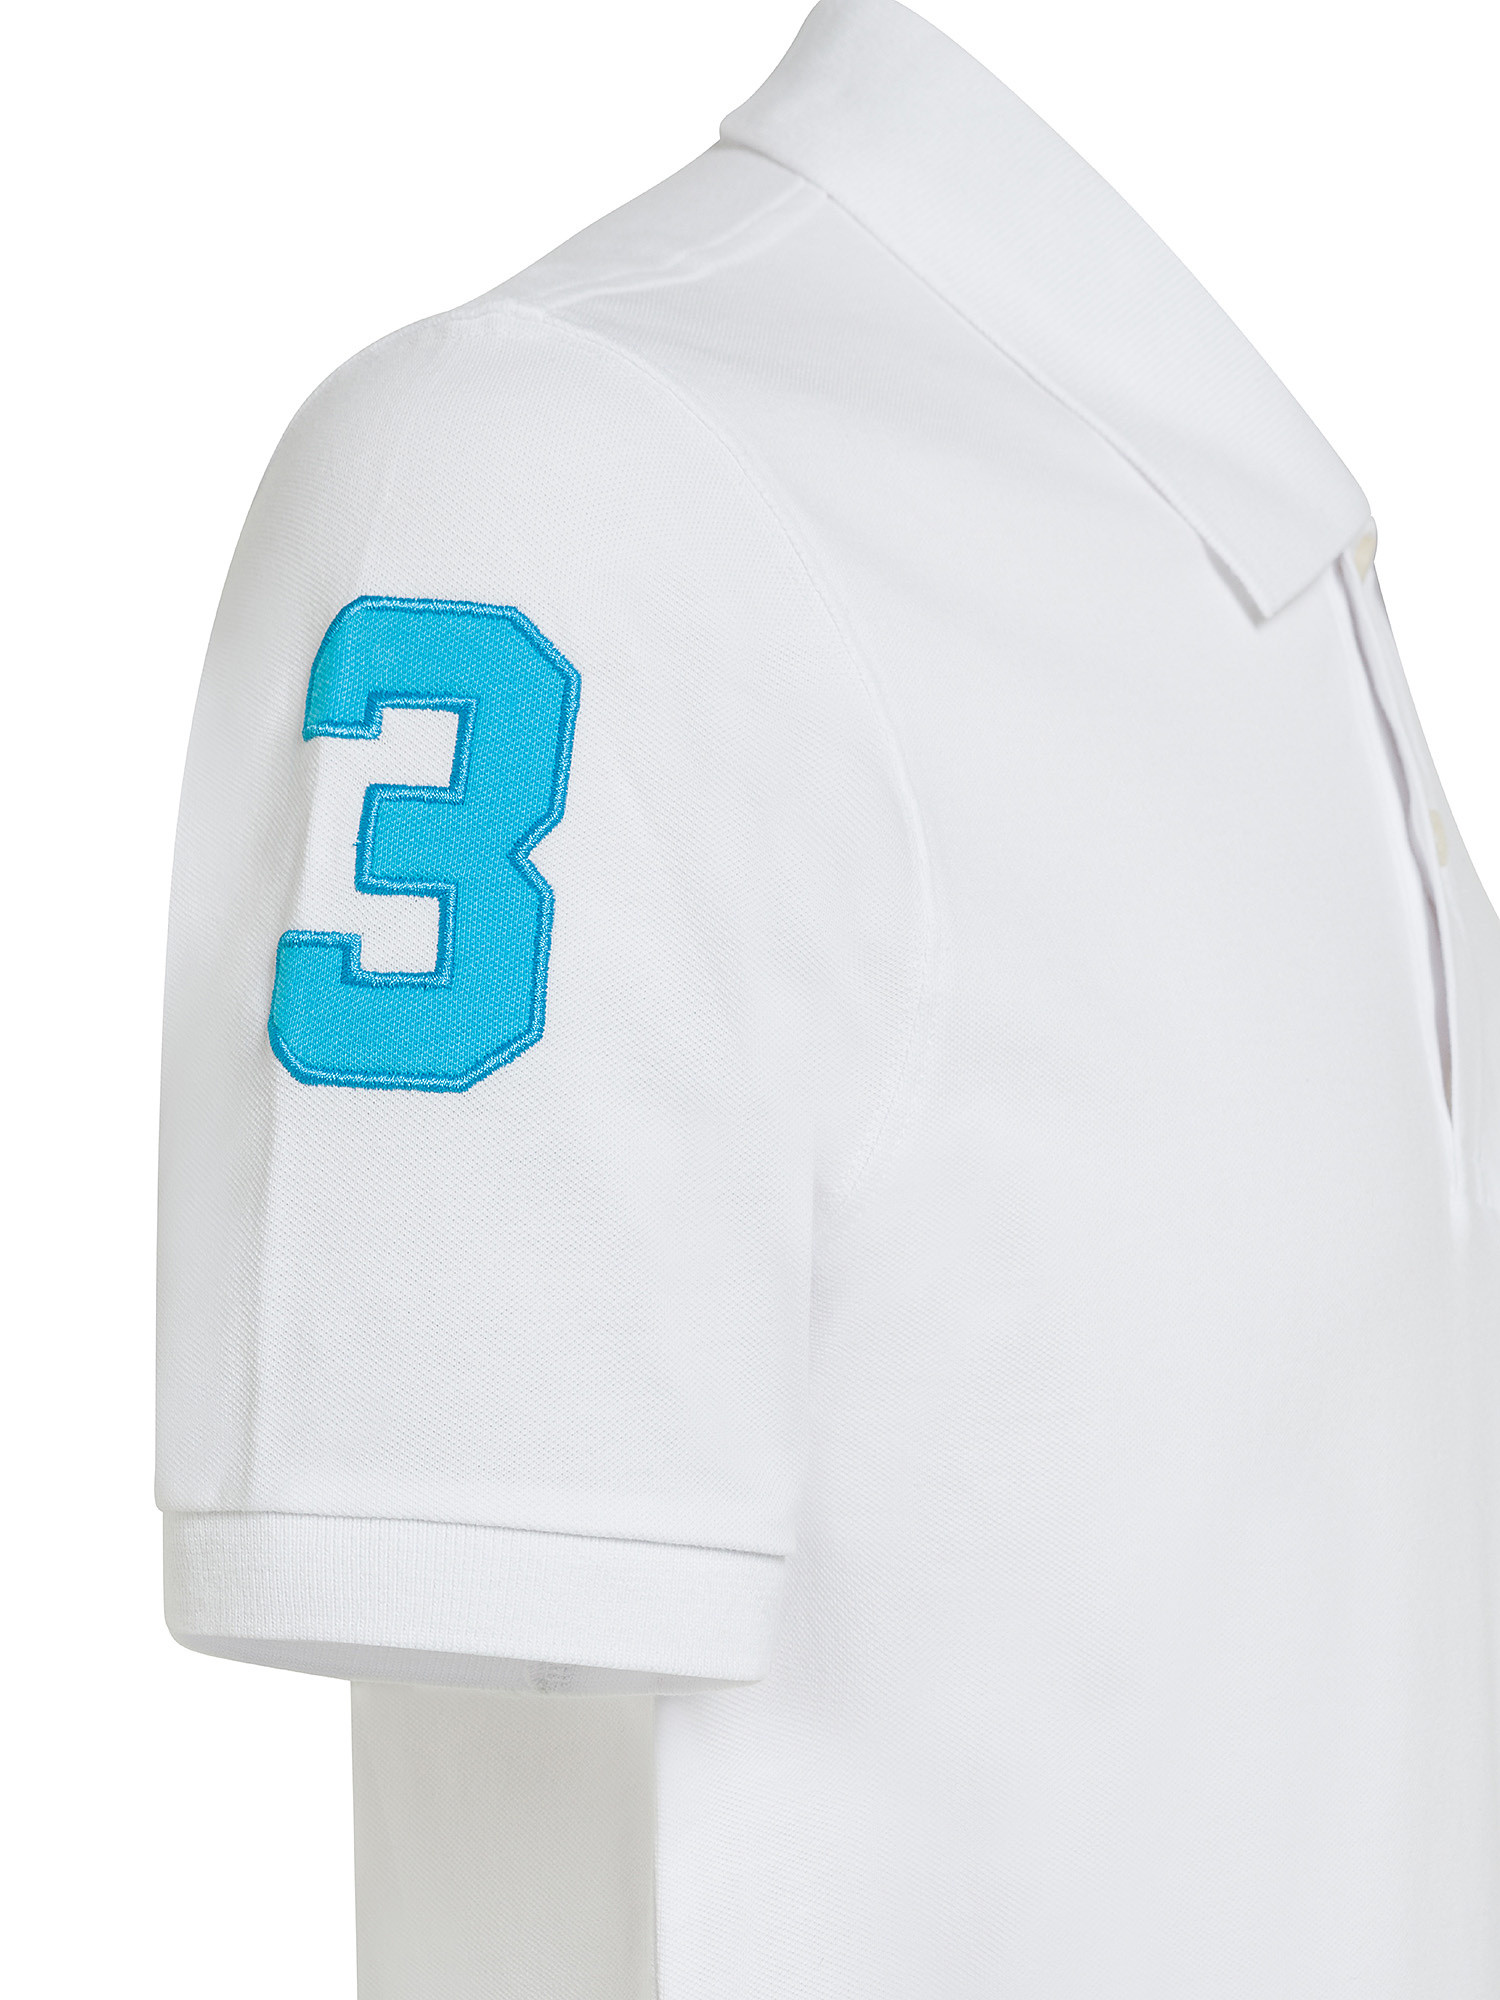 La Martina - Short-sleeved polo shirt in stretch piqué, White, large image number 2